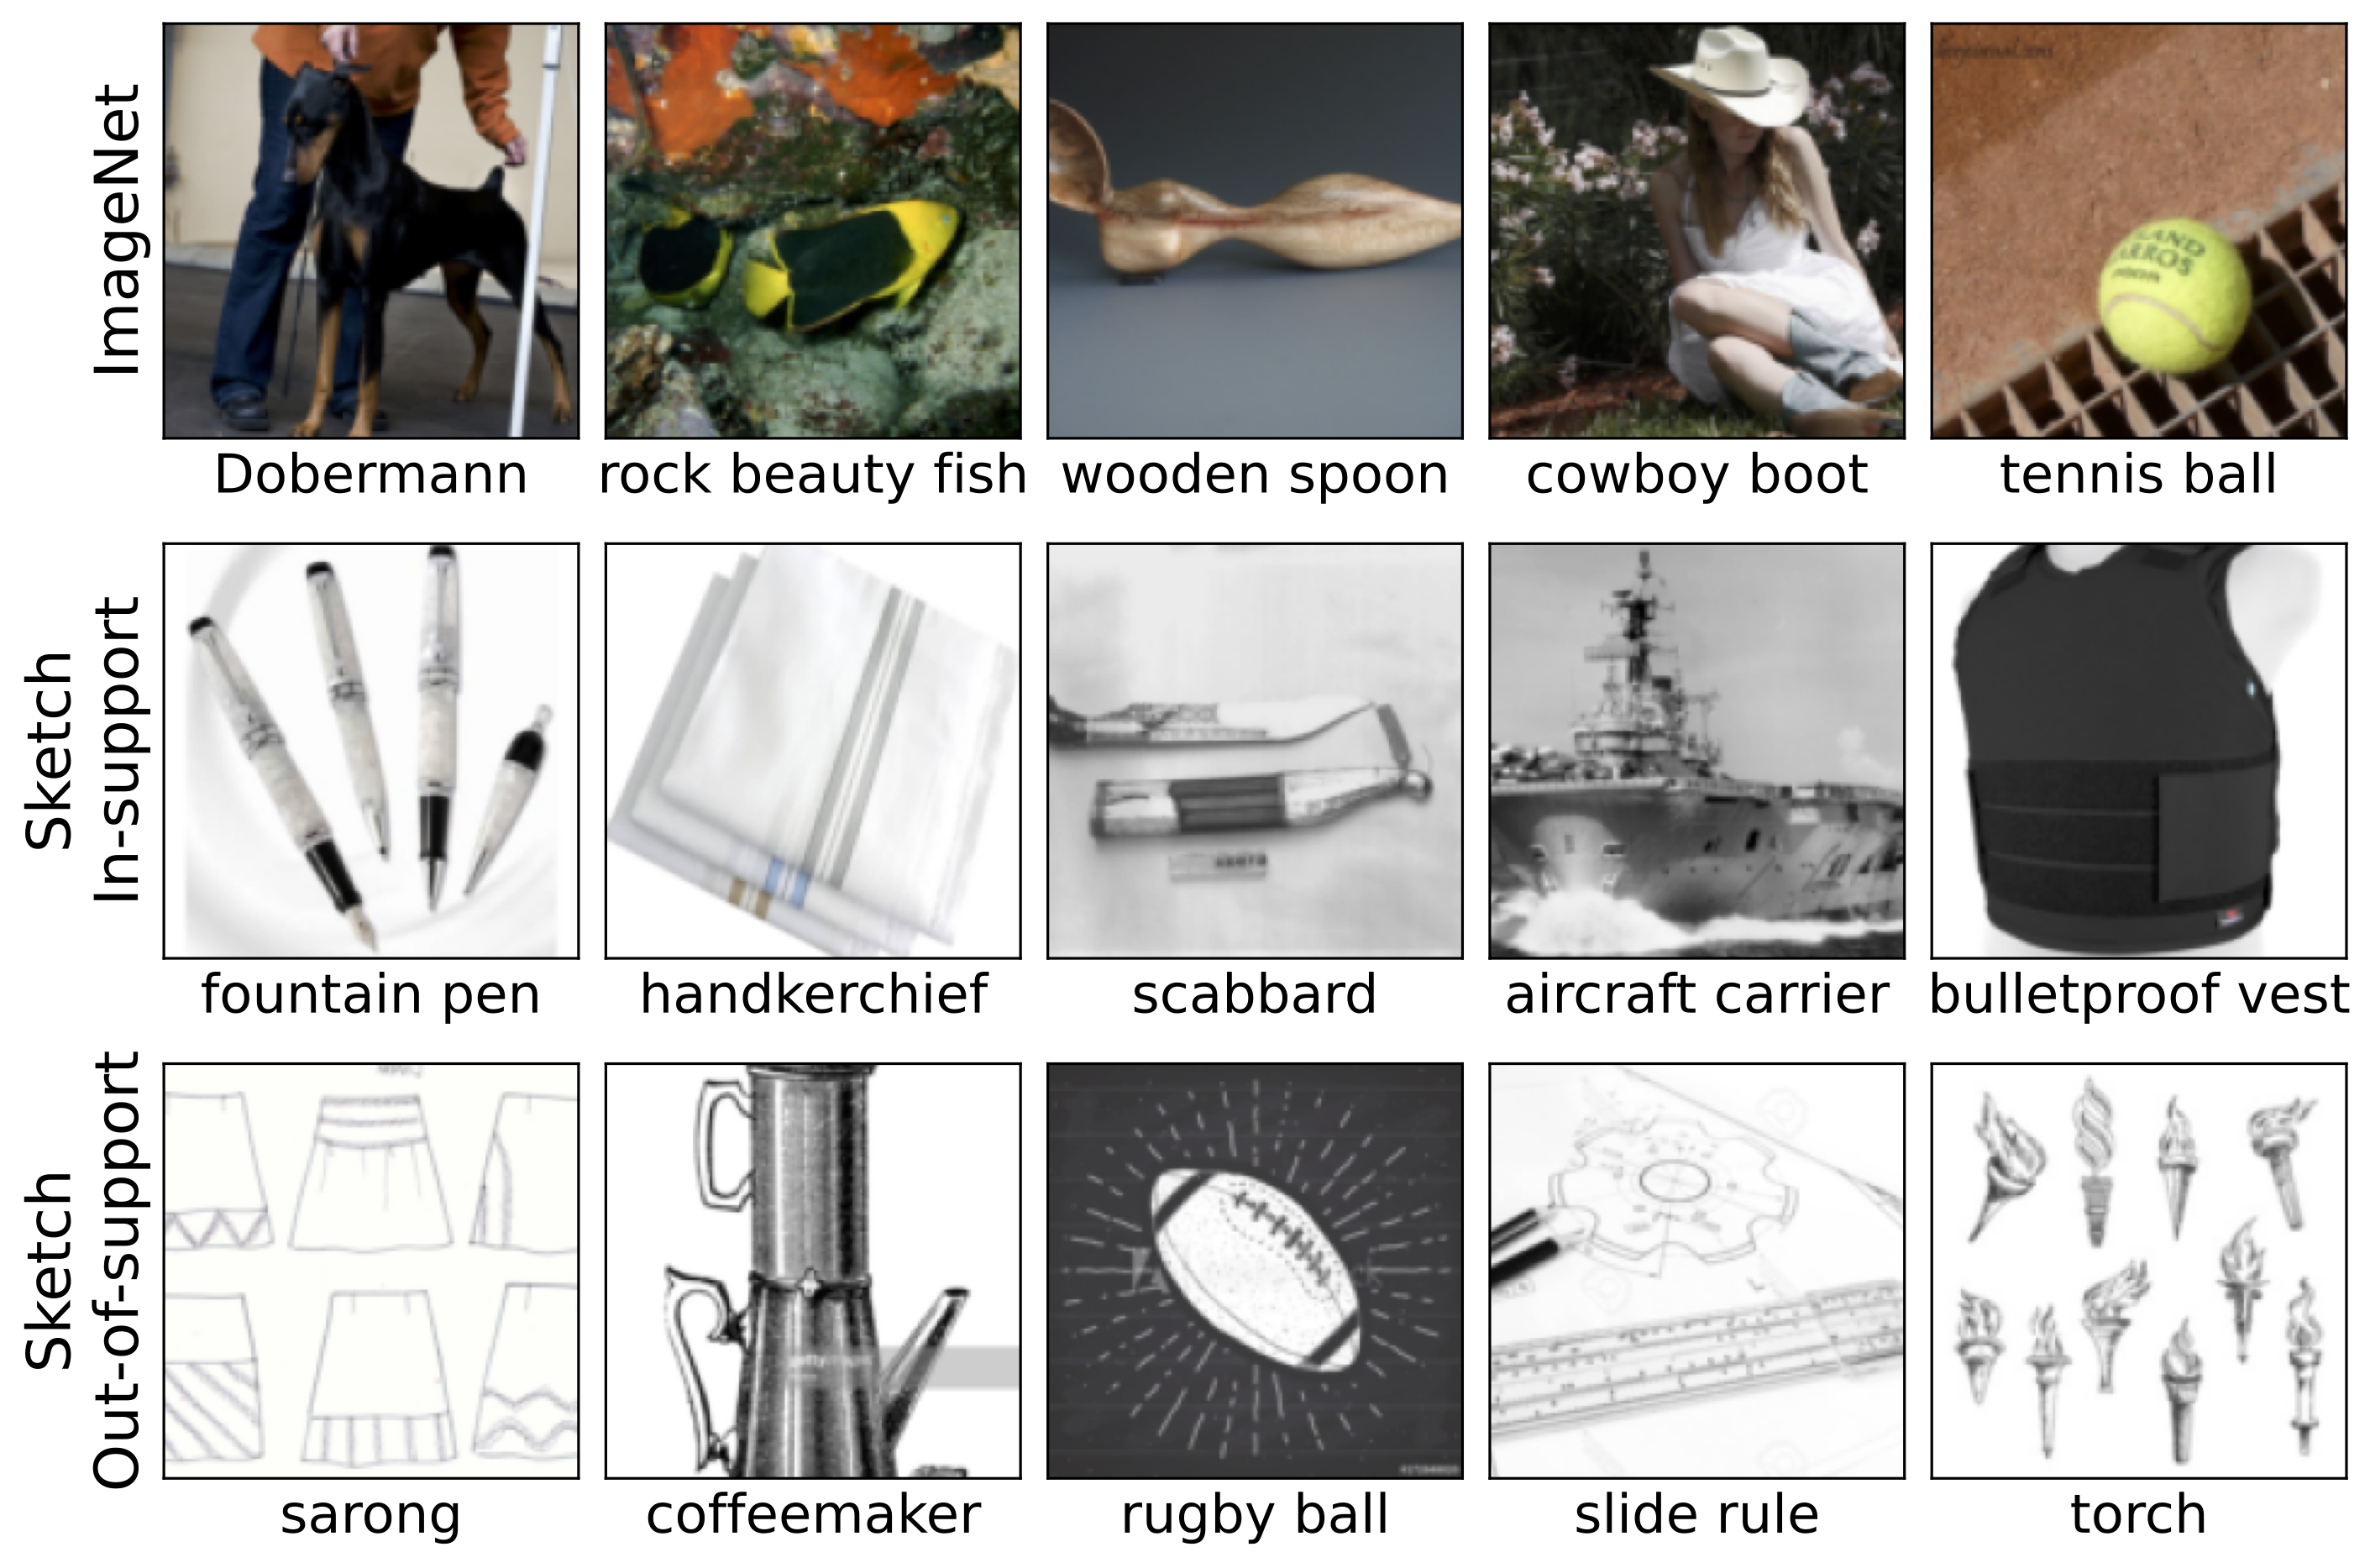 Examples from the in-support and out-of-support splits of ImageNet Sketch